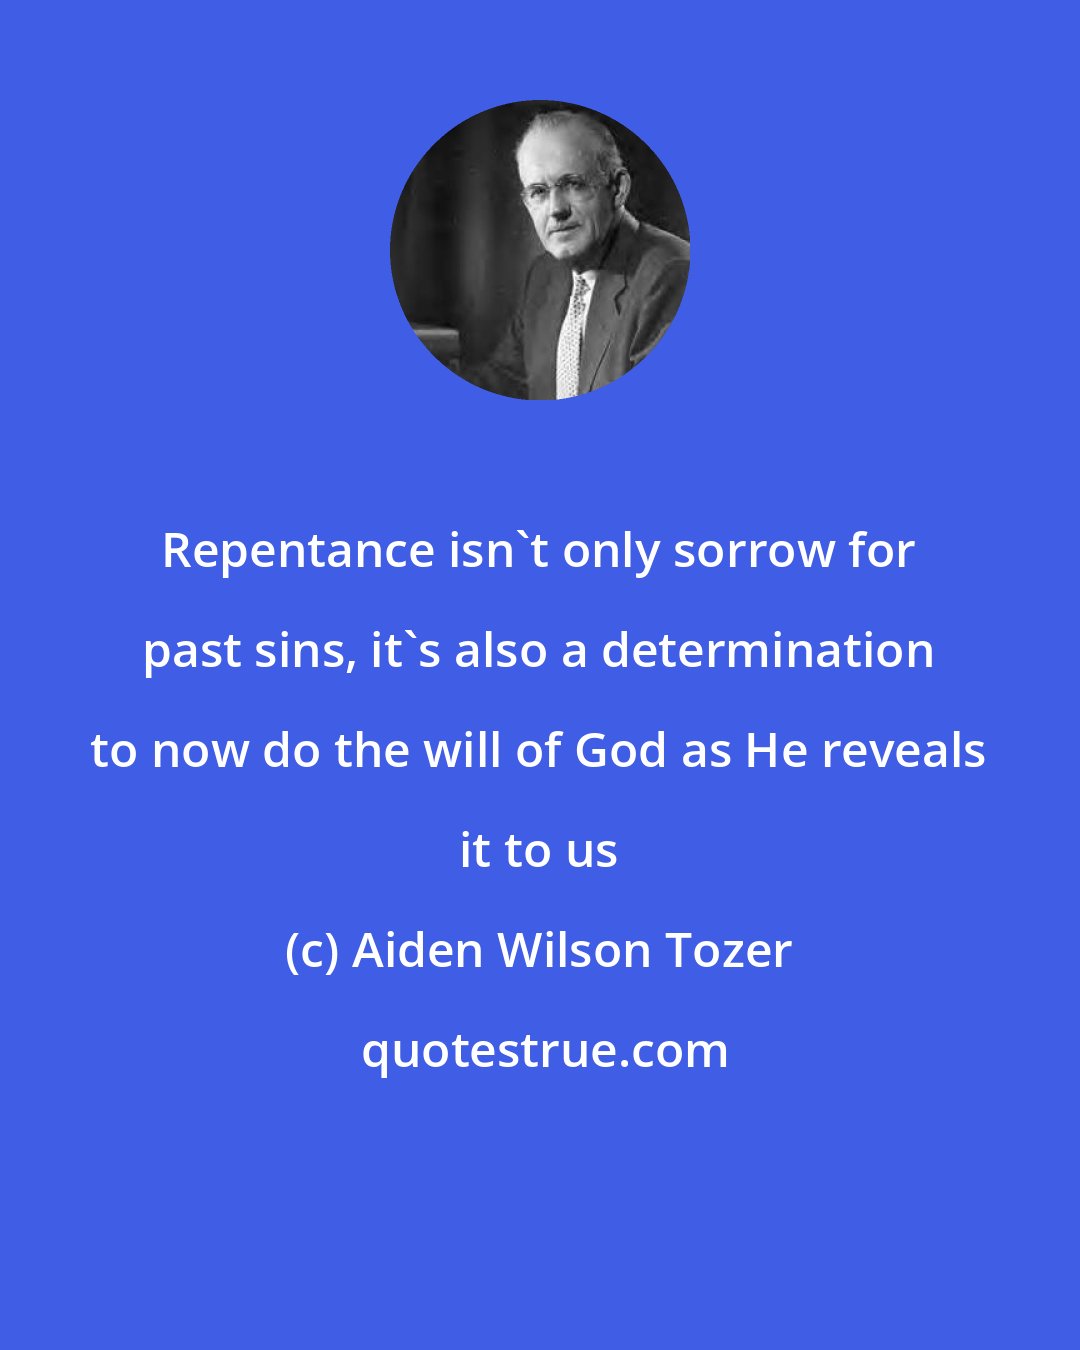 Aiden Wilson Tozer: Repentance isn't only sorrow for past sins, it's also a determination to now do the will of God as He reveals it to us